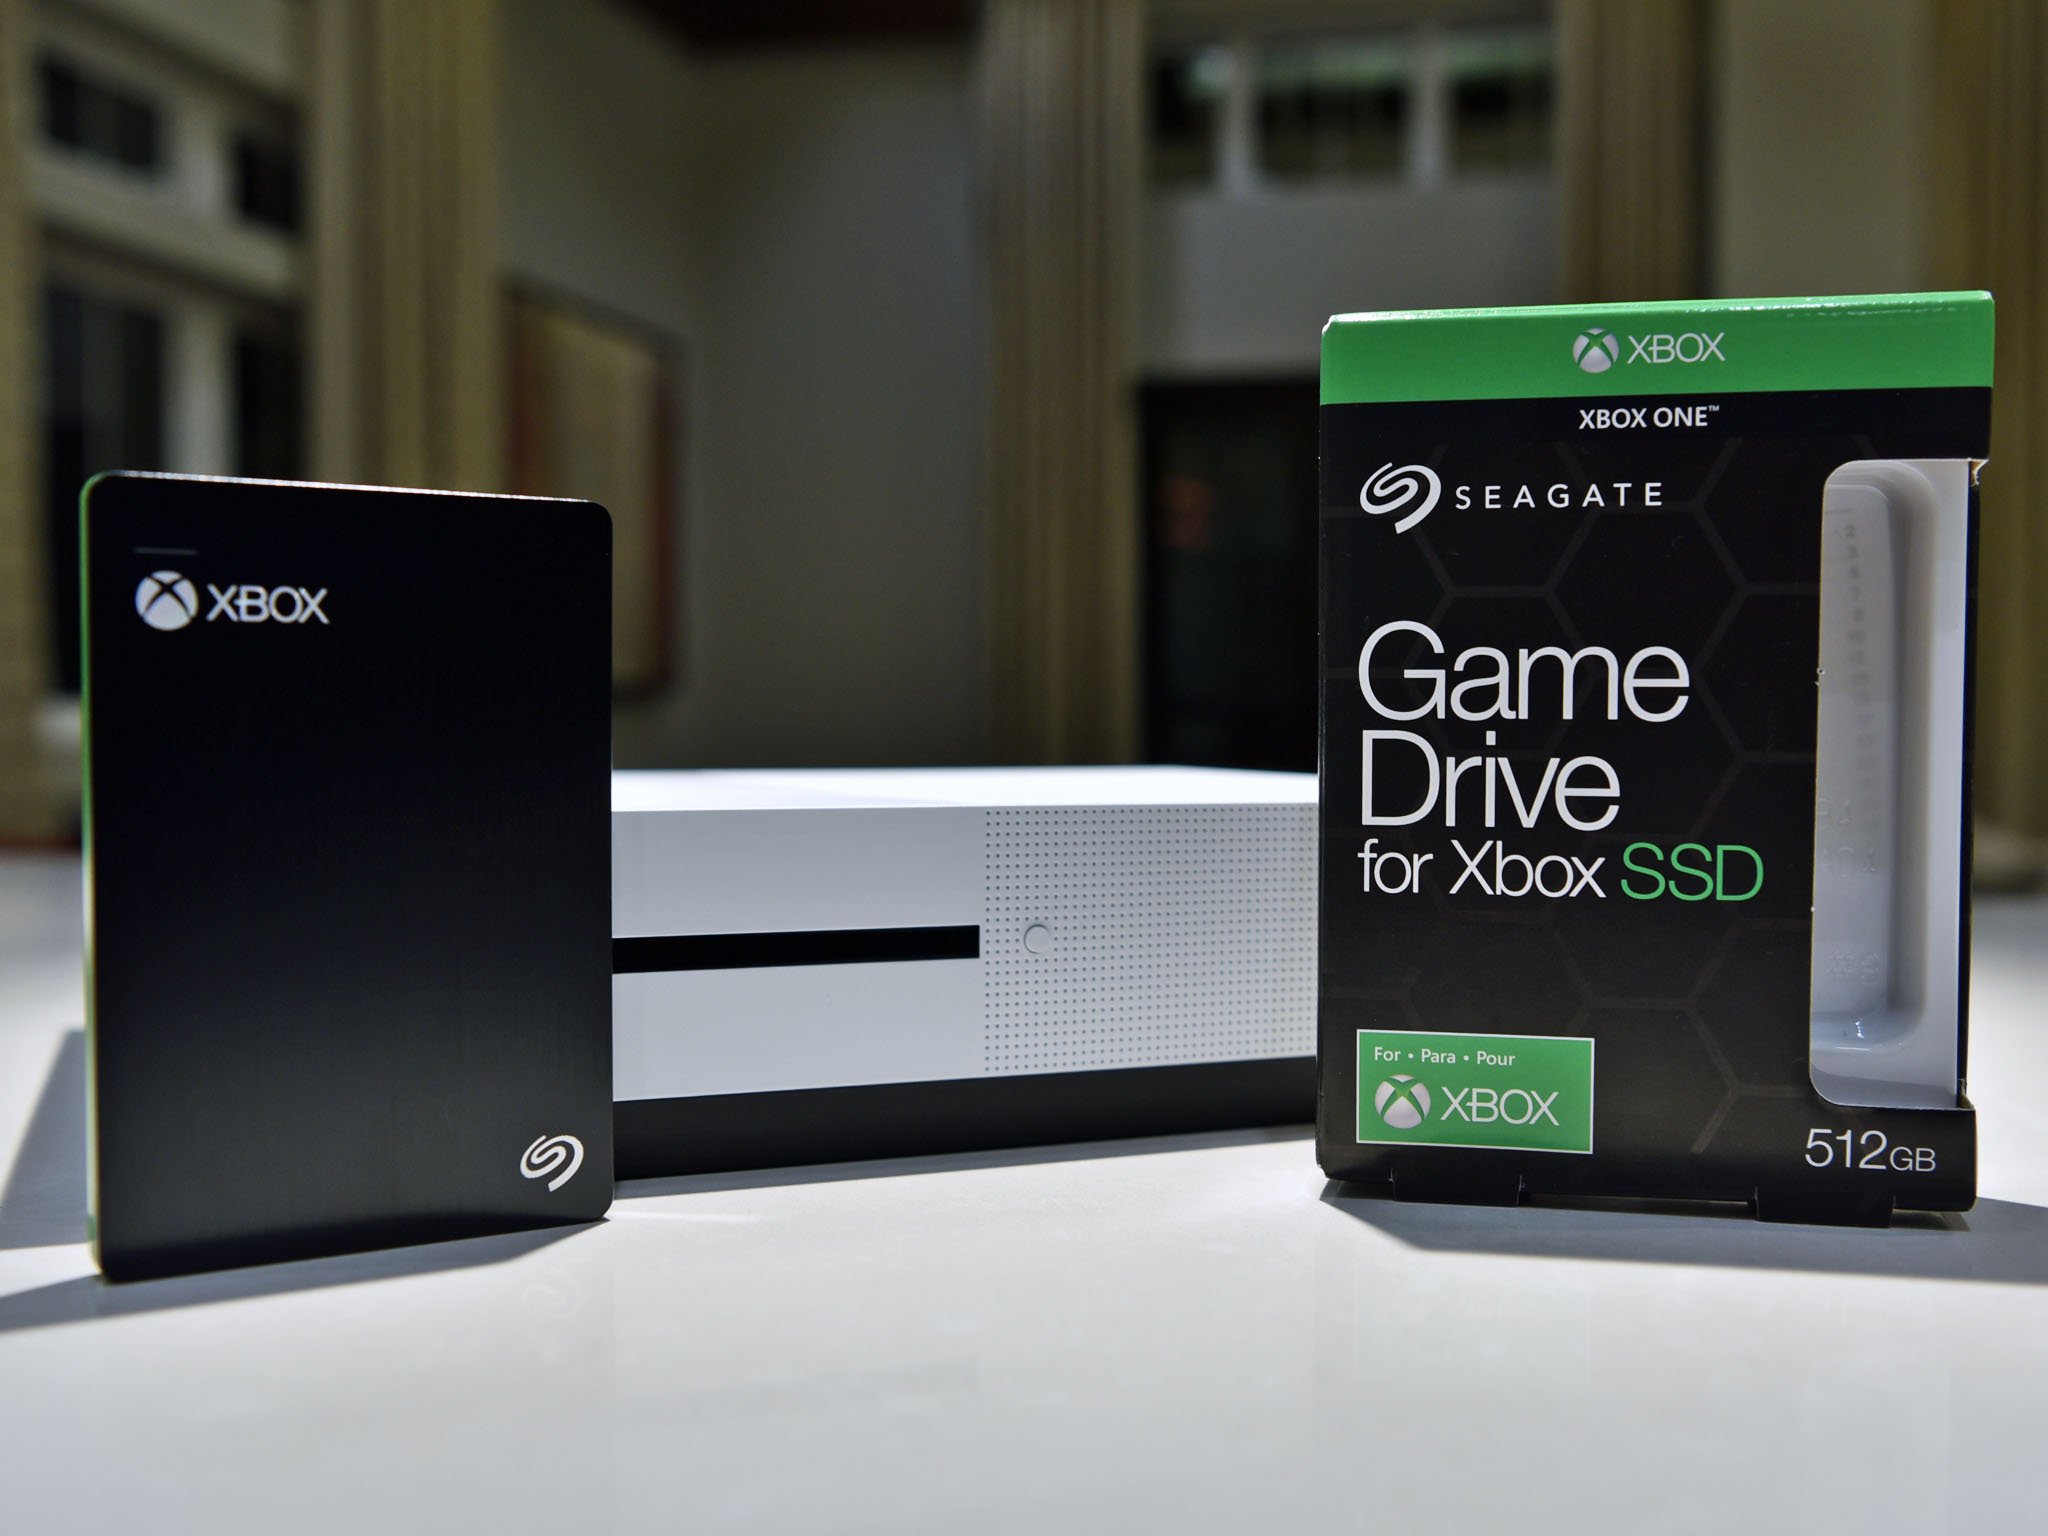 Seagate S Game Drive For Xbox Ssd Loads Games Lightning Fast But At A Cost Windows Central